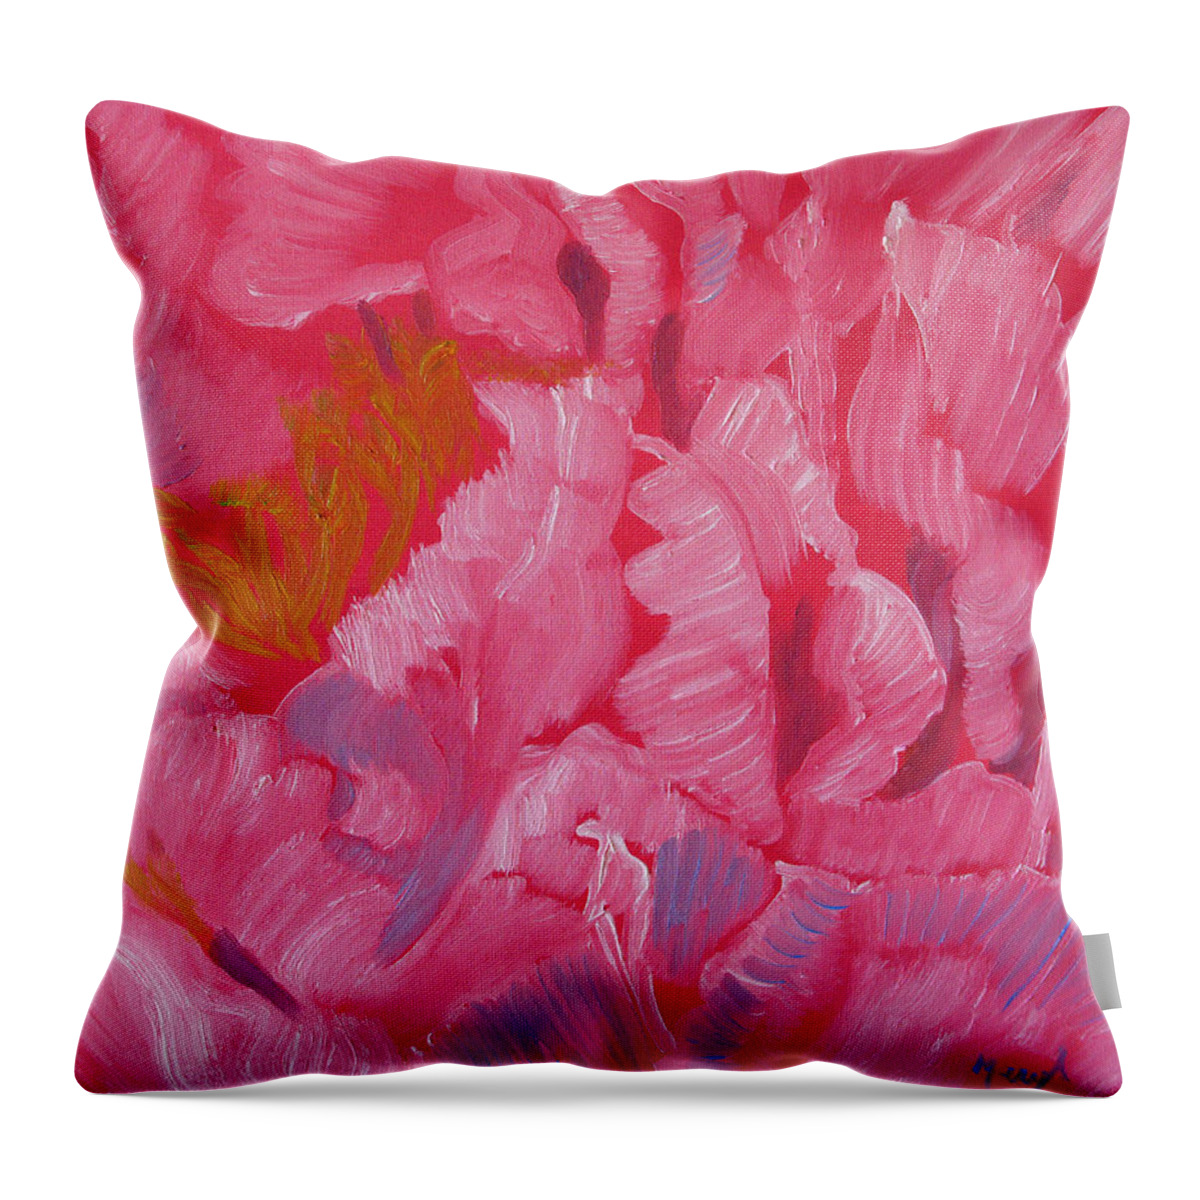 Floral Design Throw Pillow featuring the painting Frills of Petals by Meryl Goudey